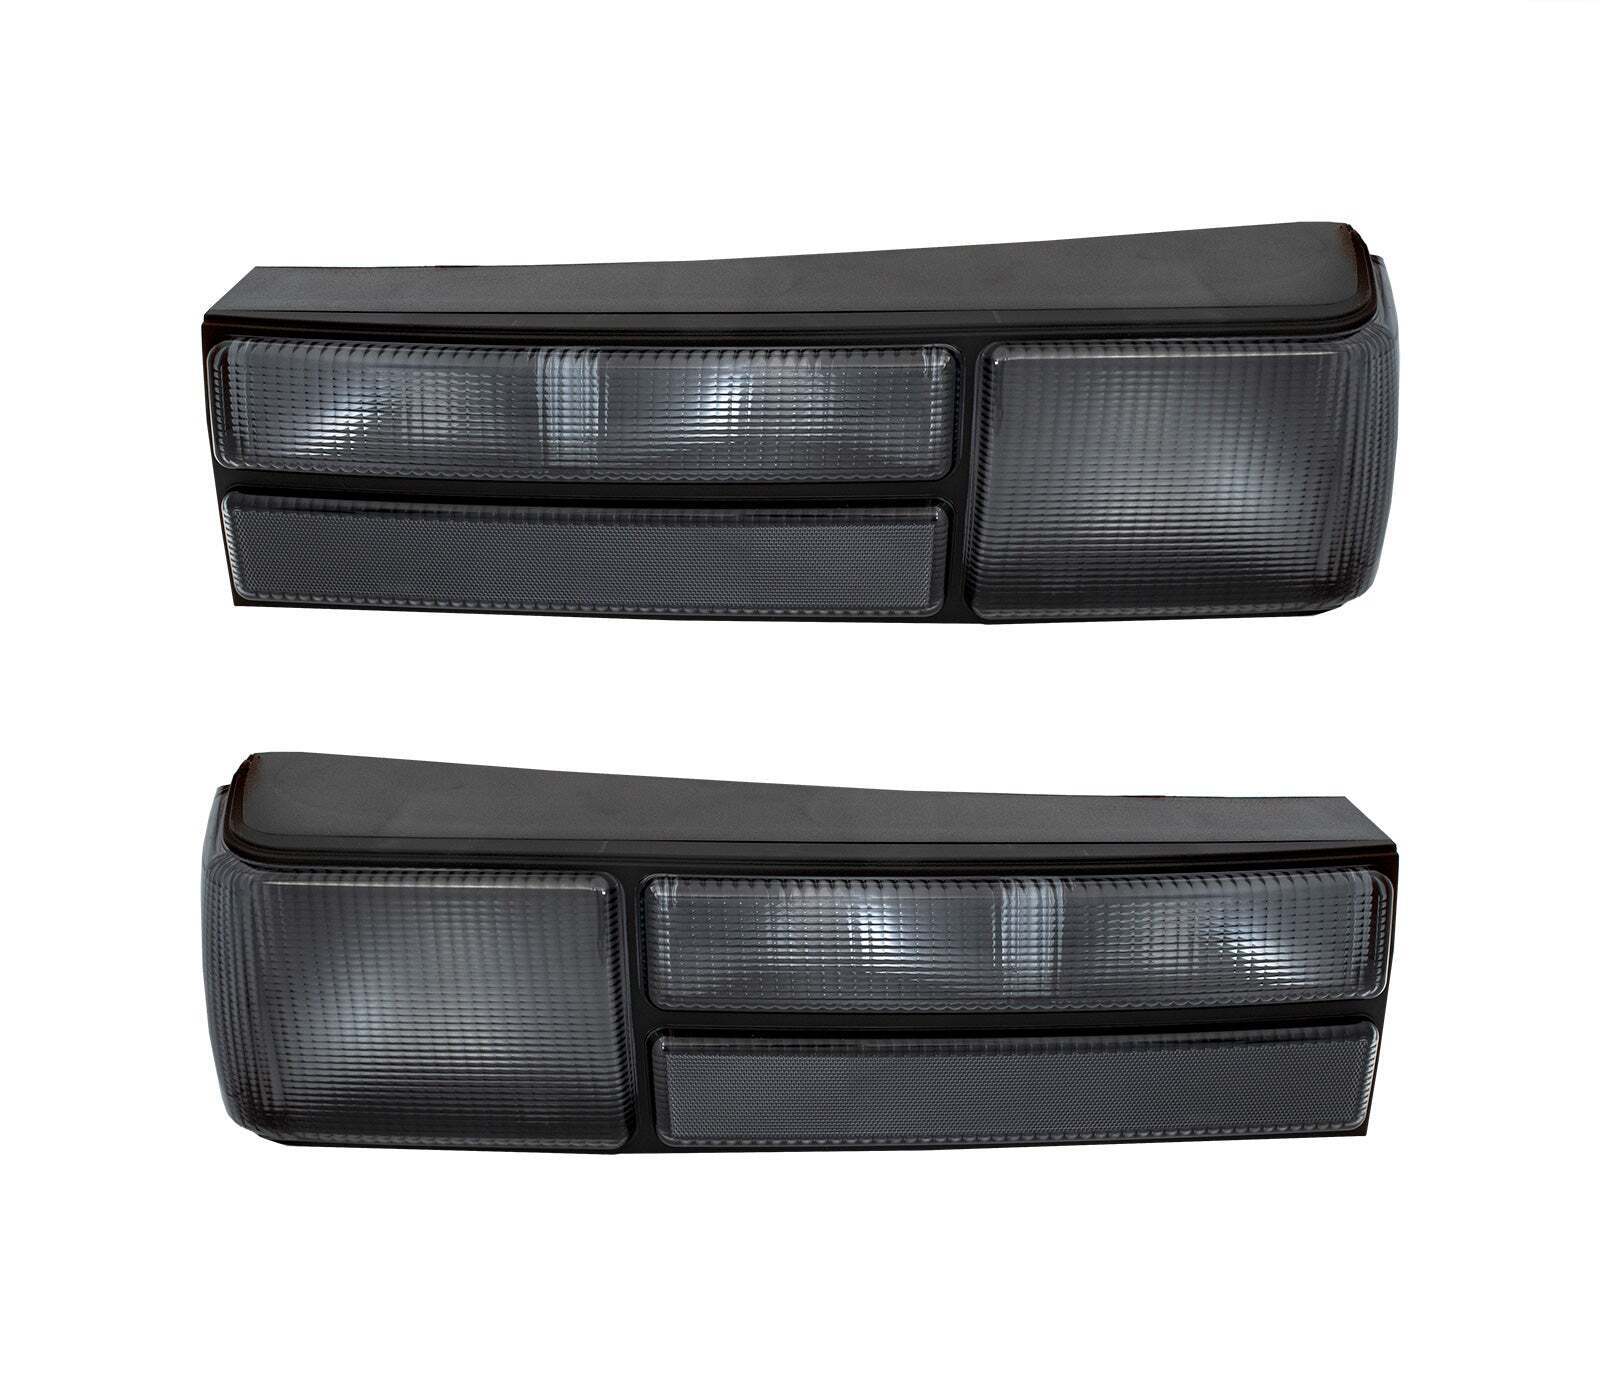 1983-1993 Mustang LX Light Smoked Complete Taillights w/ Housings, LH RH Pair